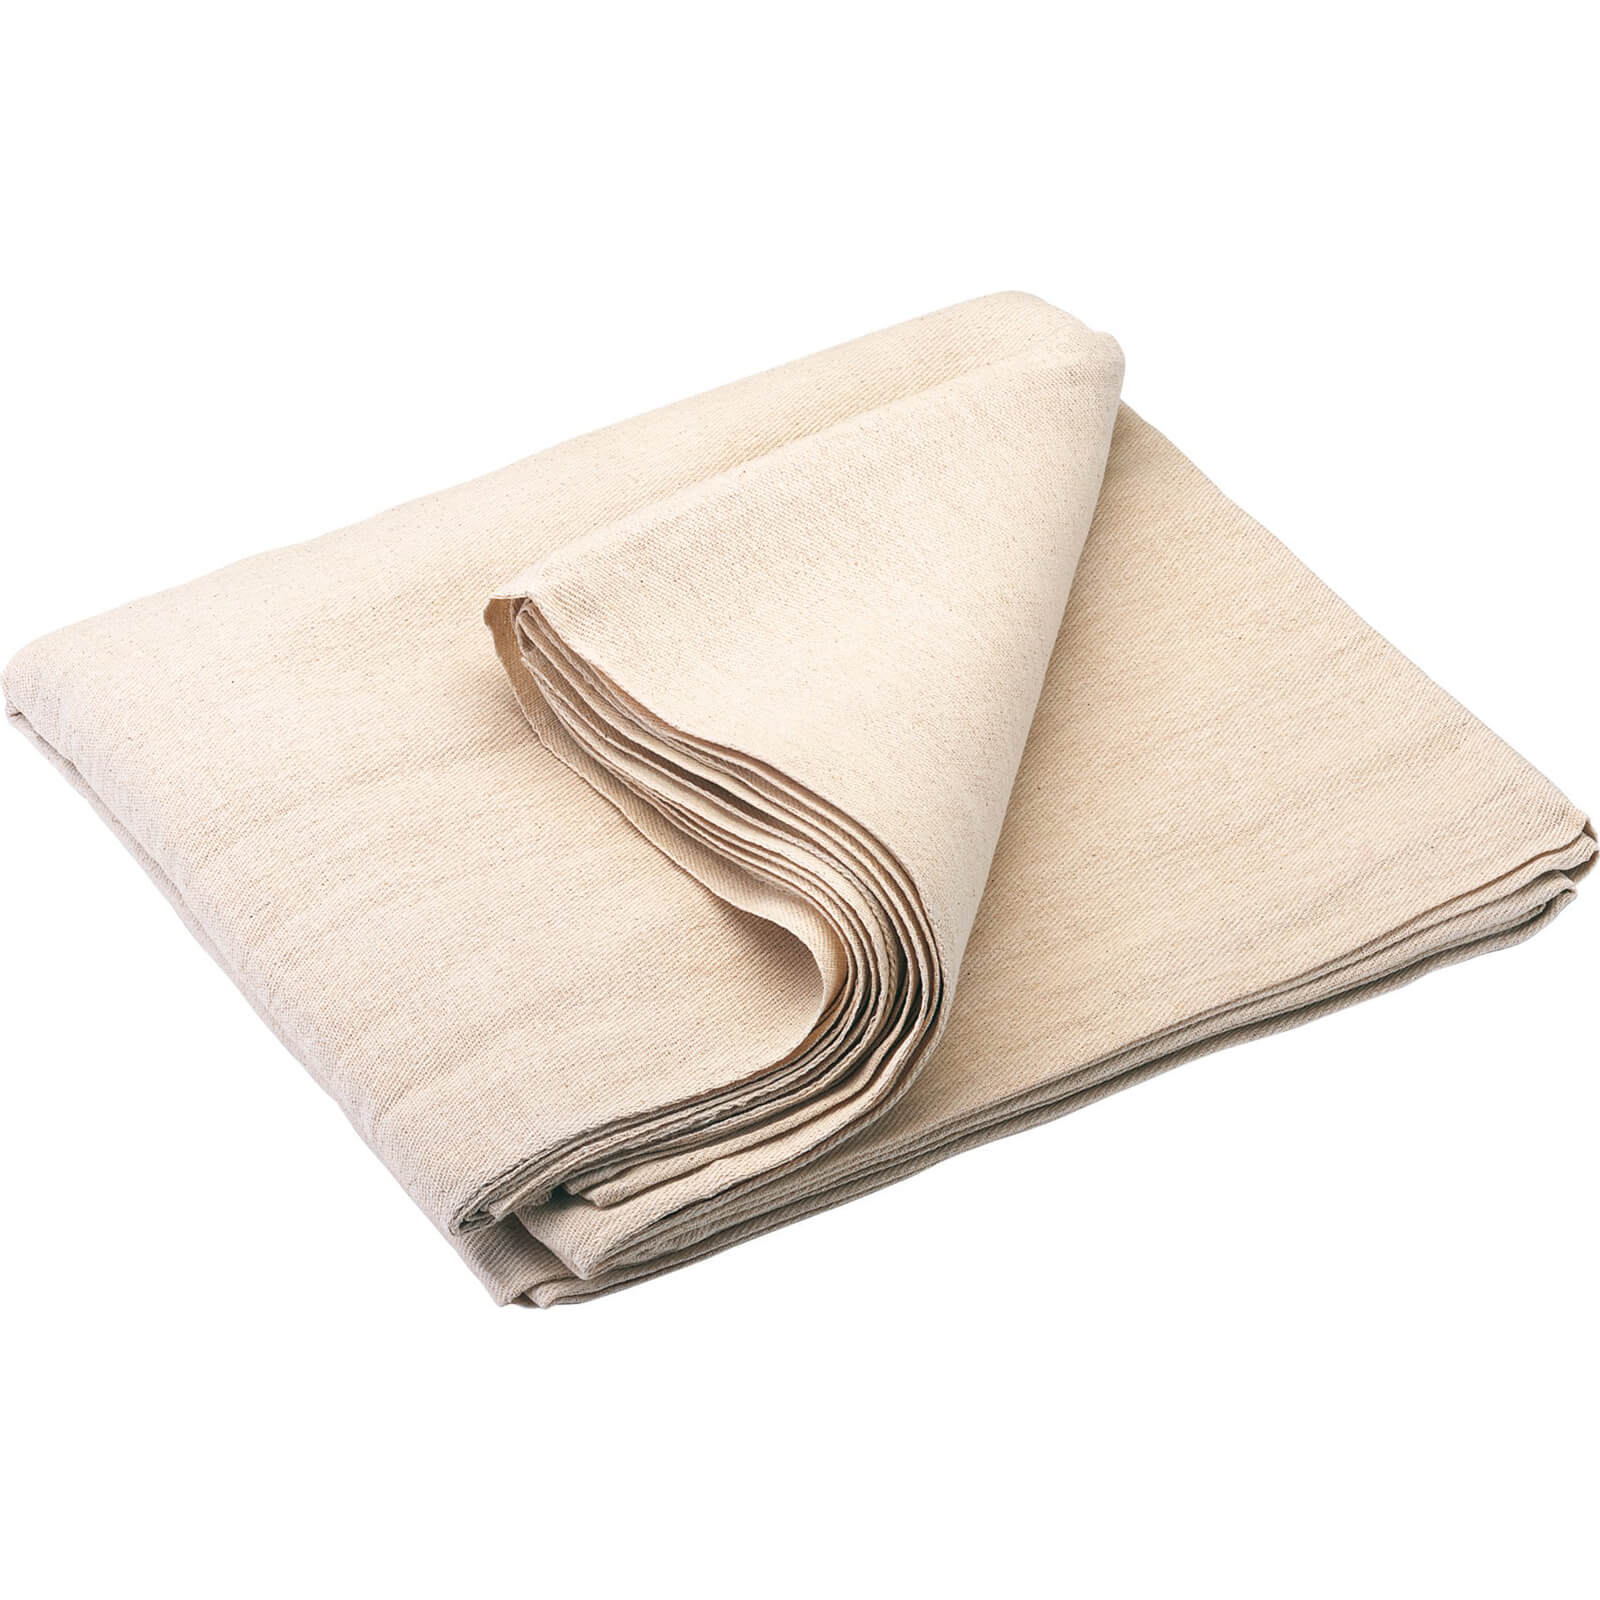 Image of Draper Cotton Dust Sheet 3.6m 3.6m Pack of 1